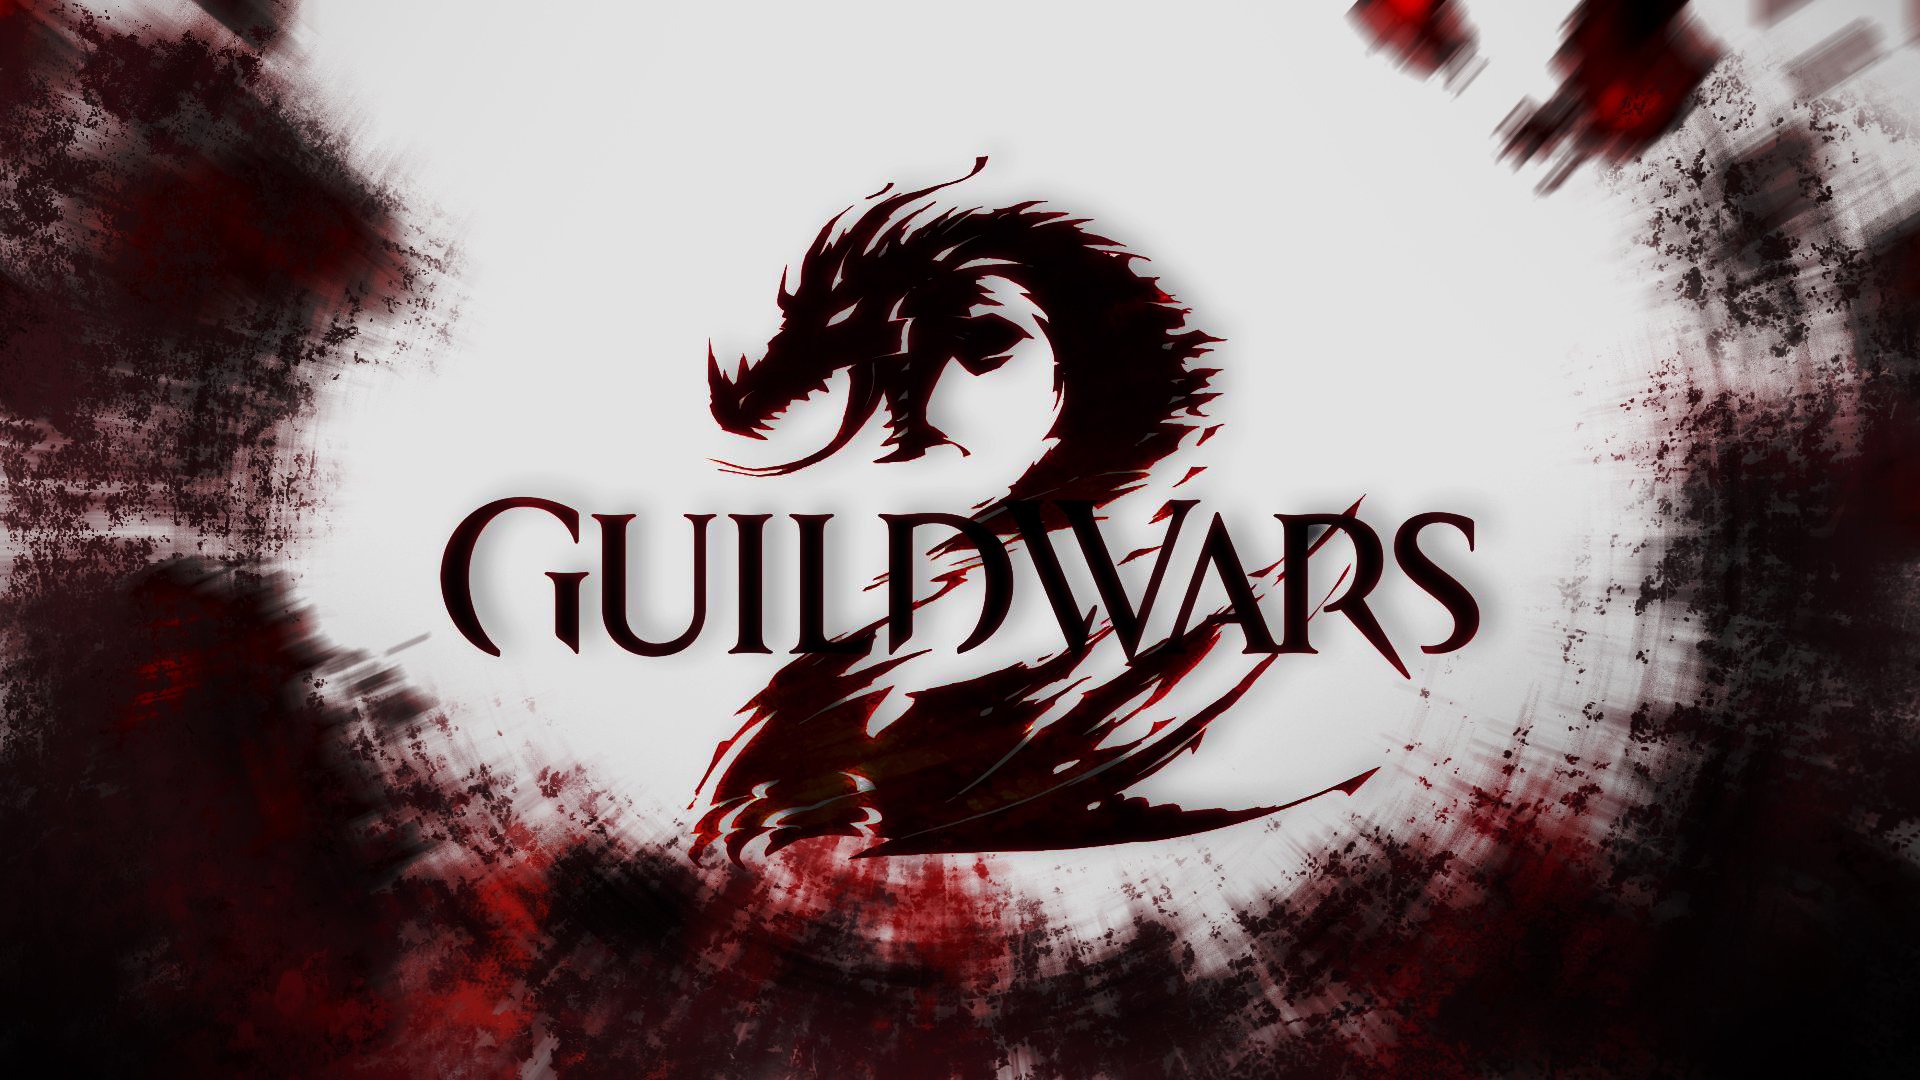 Guild wars 2 for pc